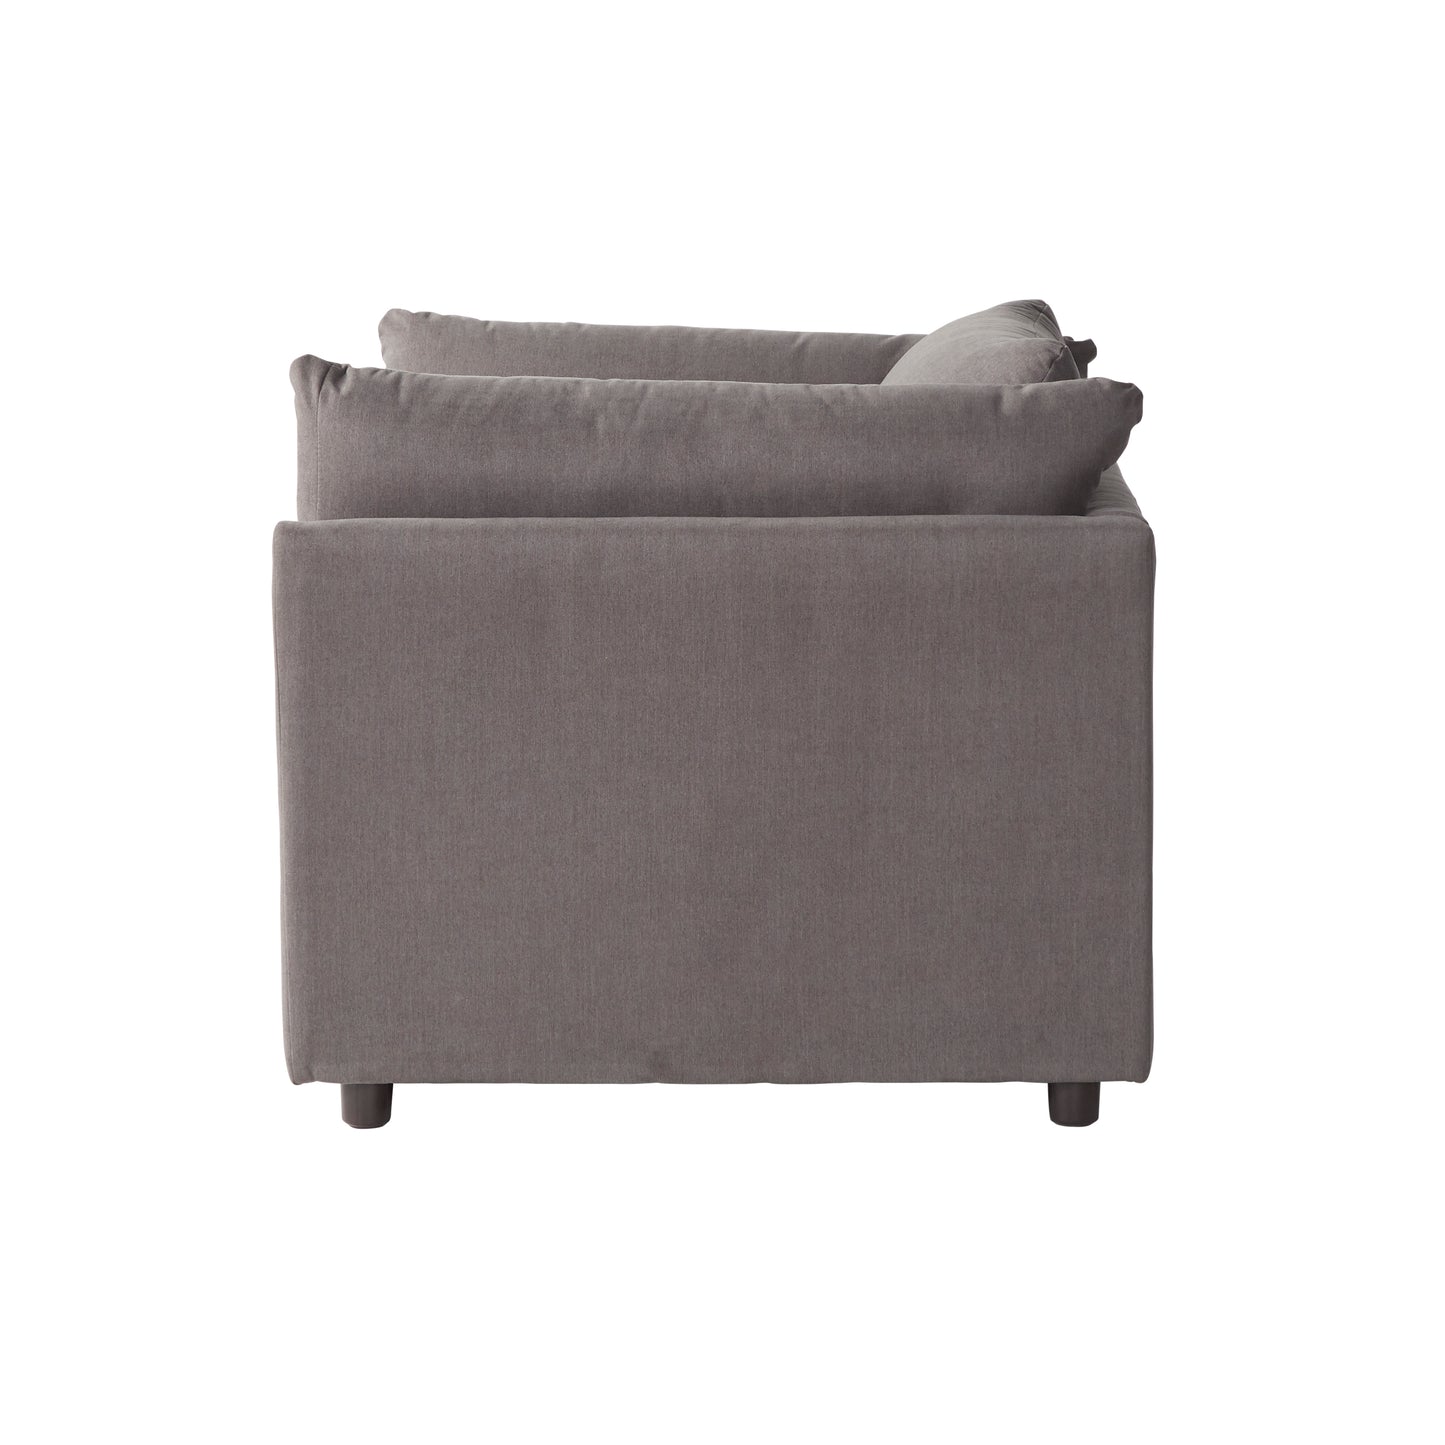 Roundhill Furniture Enda Oversized Living Room Pillow Back Cuddler Arm Chair with Ottoman, Carbon Gray